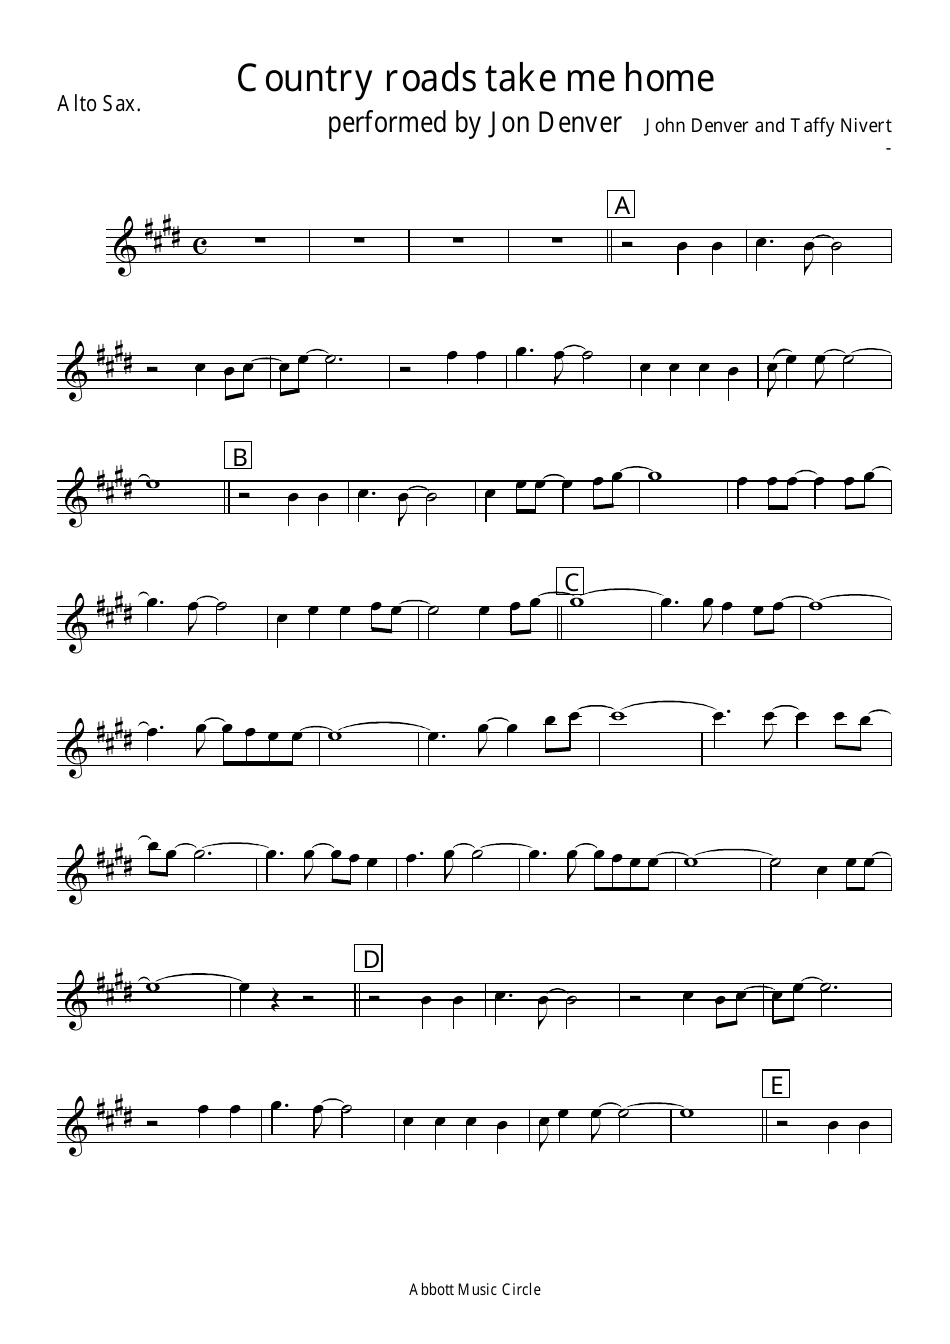 Sheet music preview of "Country Roads Take Me Home" for alto saxophone performed by Jon Denver and Taffy Nivert on TemplateRoller.